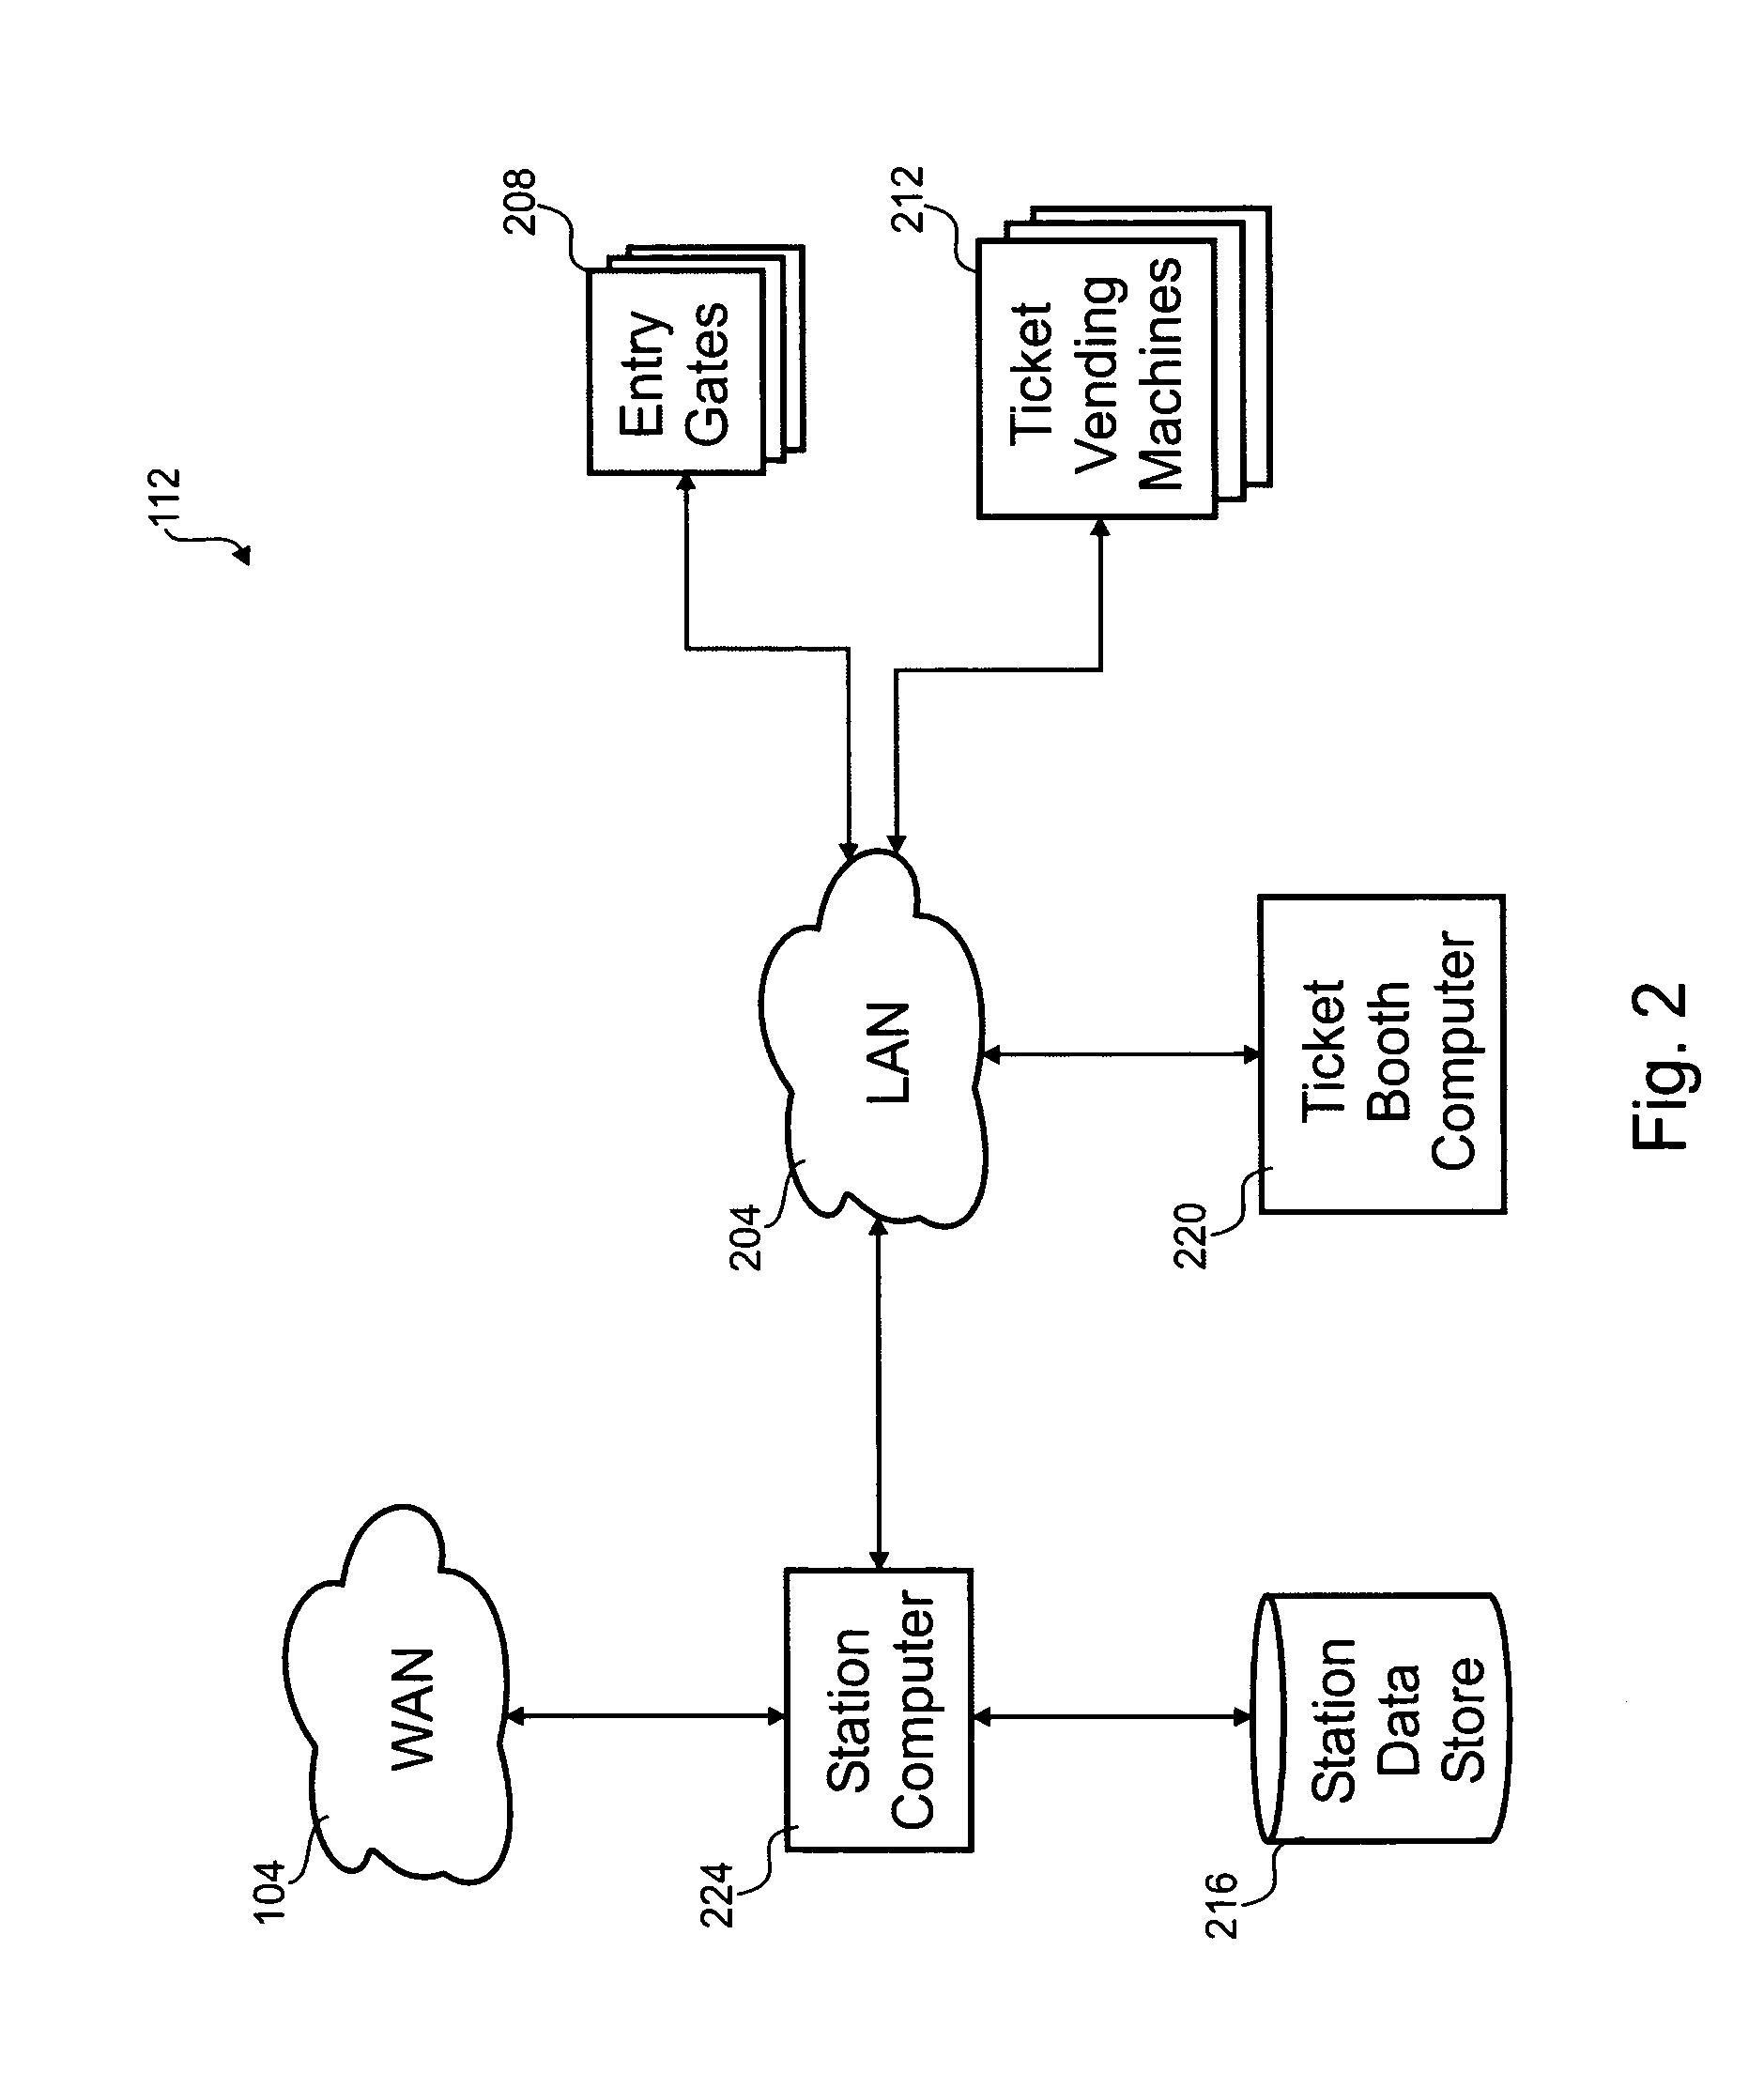 Directed autoload of contactless stored value card within a transportation system